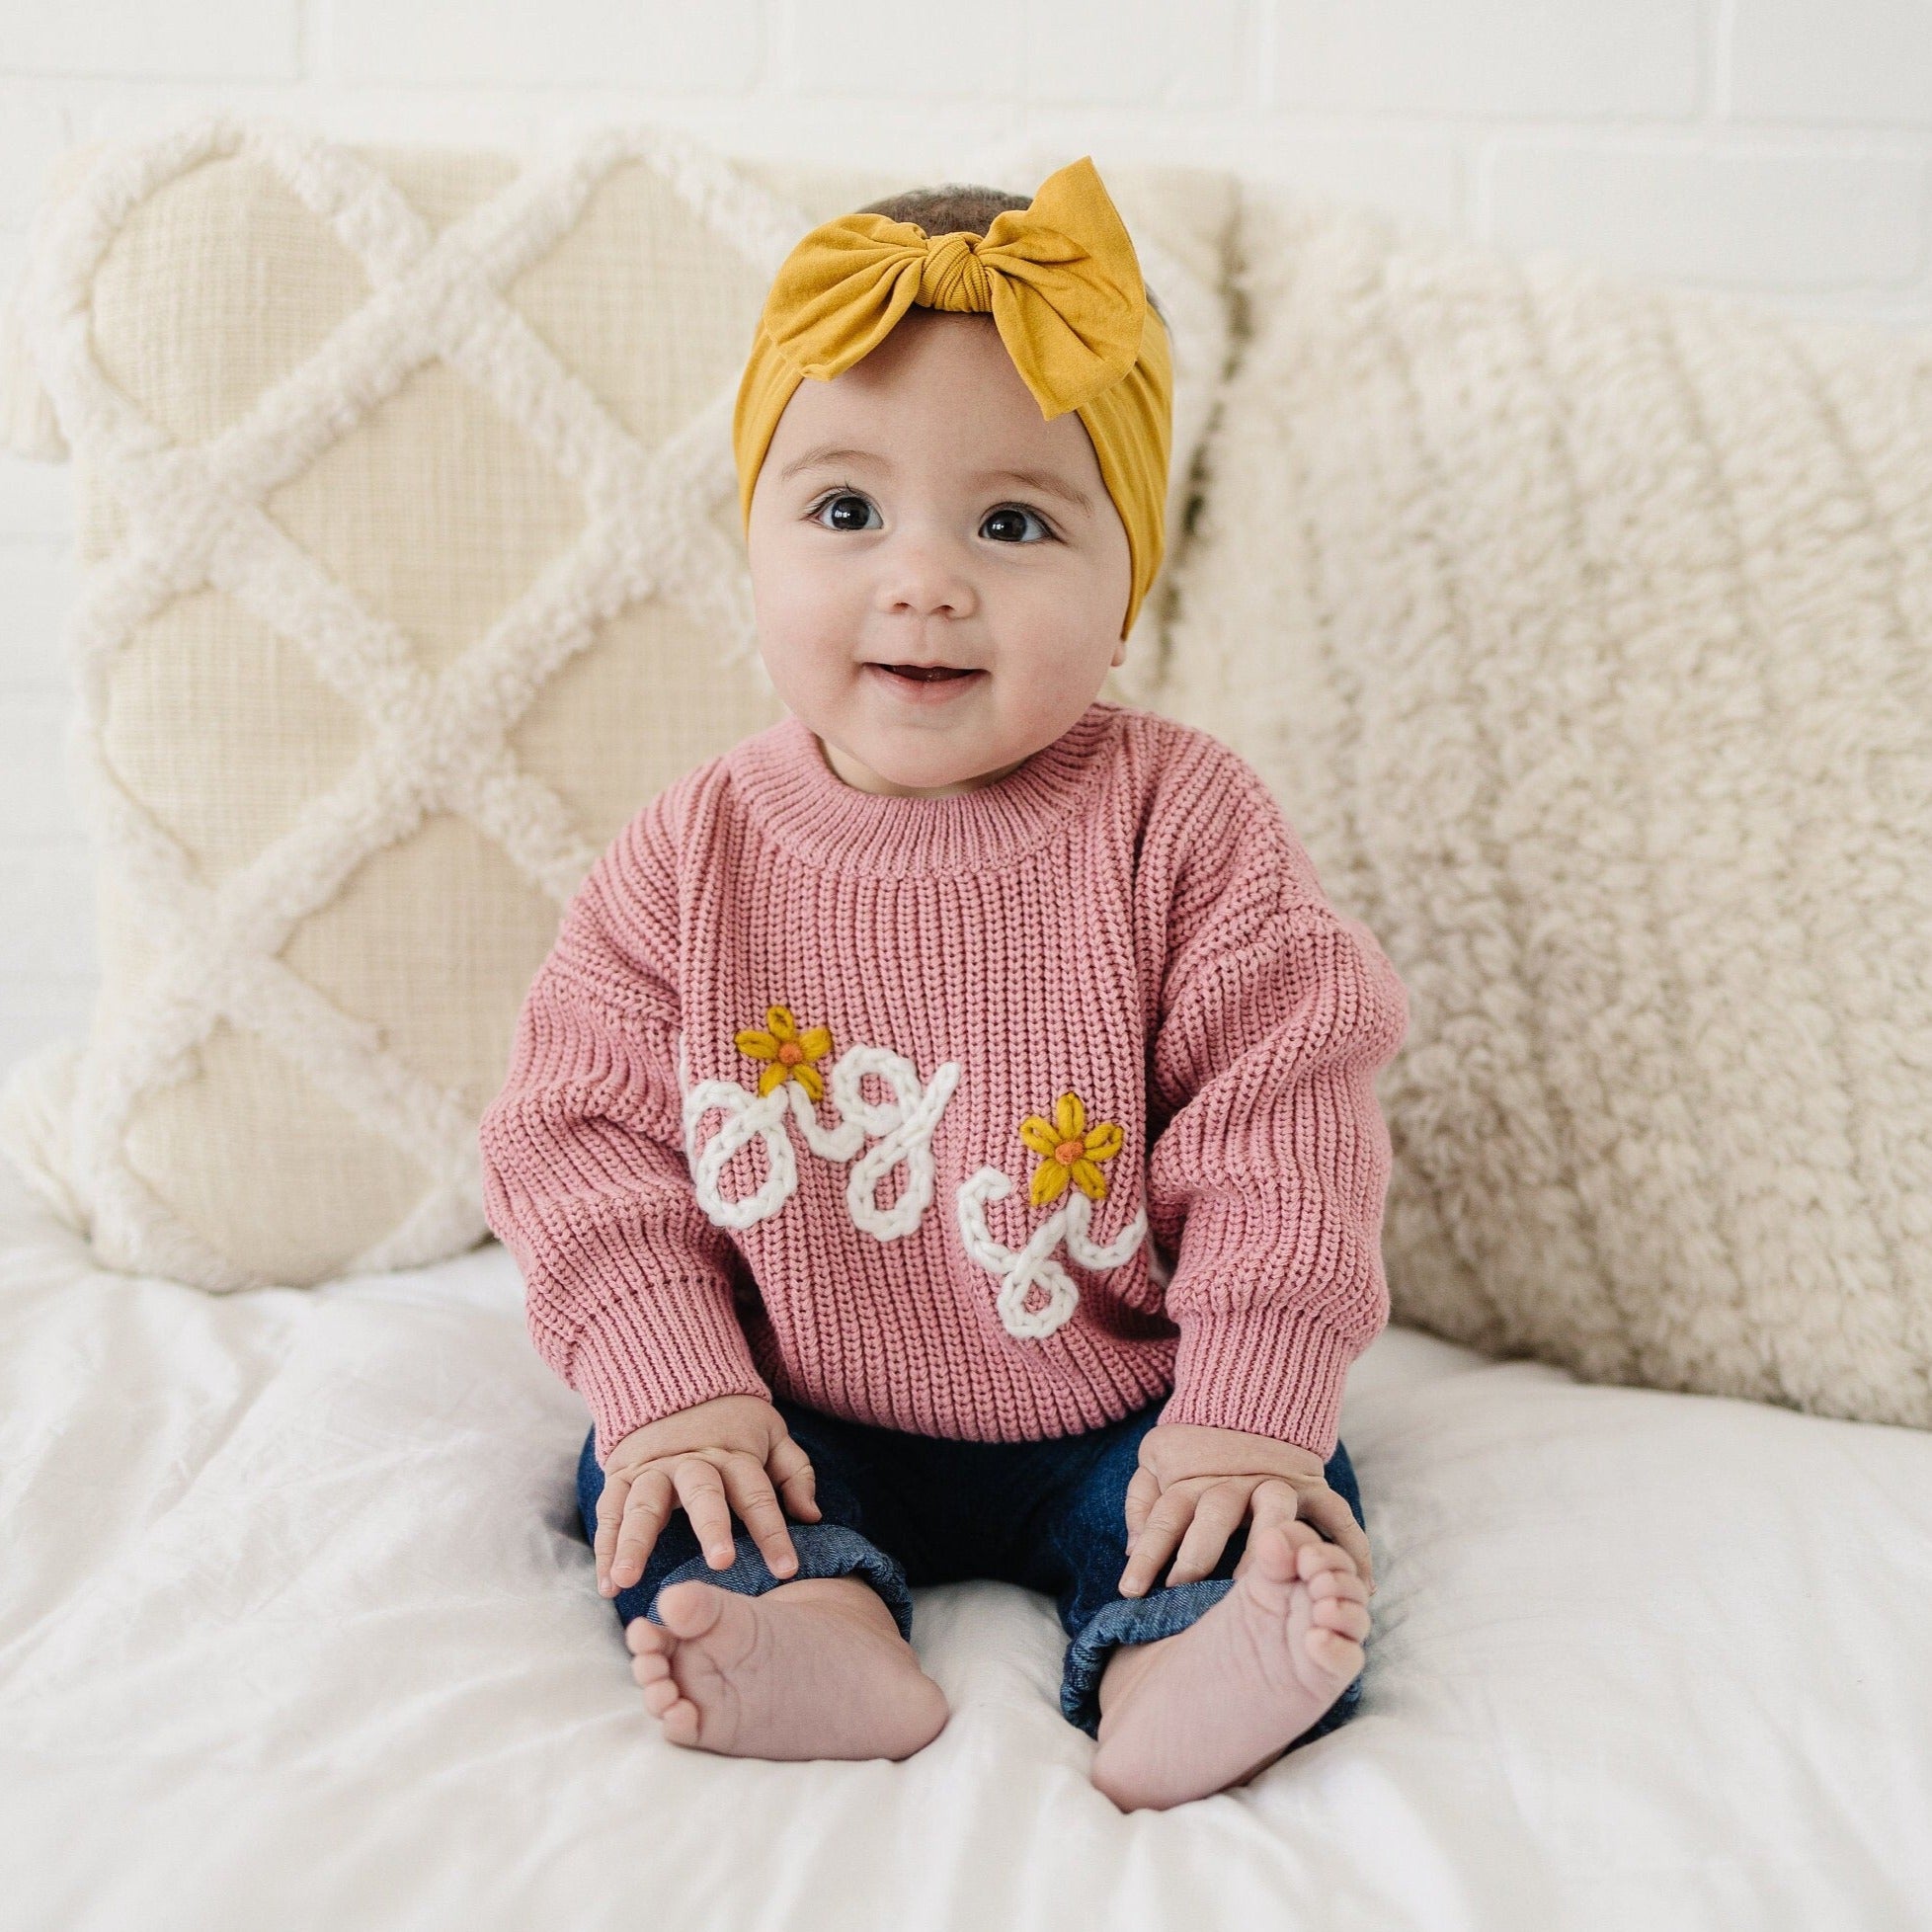 Big Sis Hand Embroidered Chunky Knit Sweater for Babies & Toddlers - Sister Embroidered Baby Sweater - Pregnancy Announcement Shirt